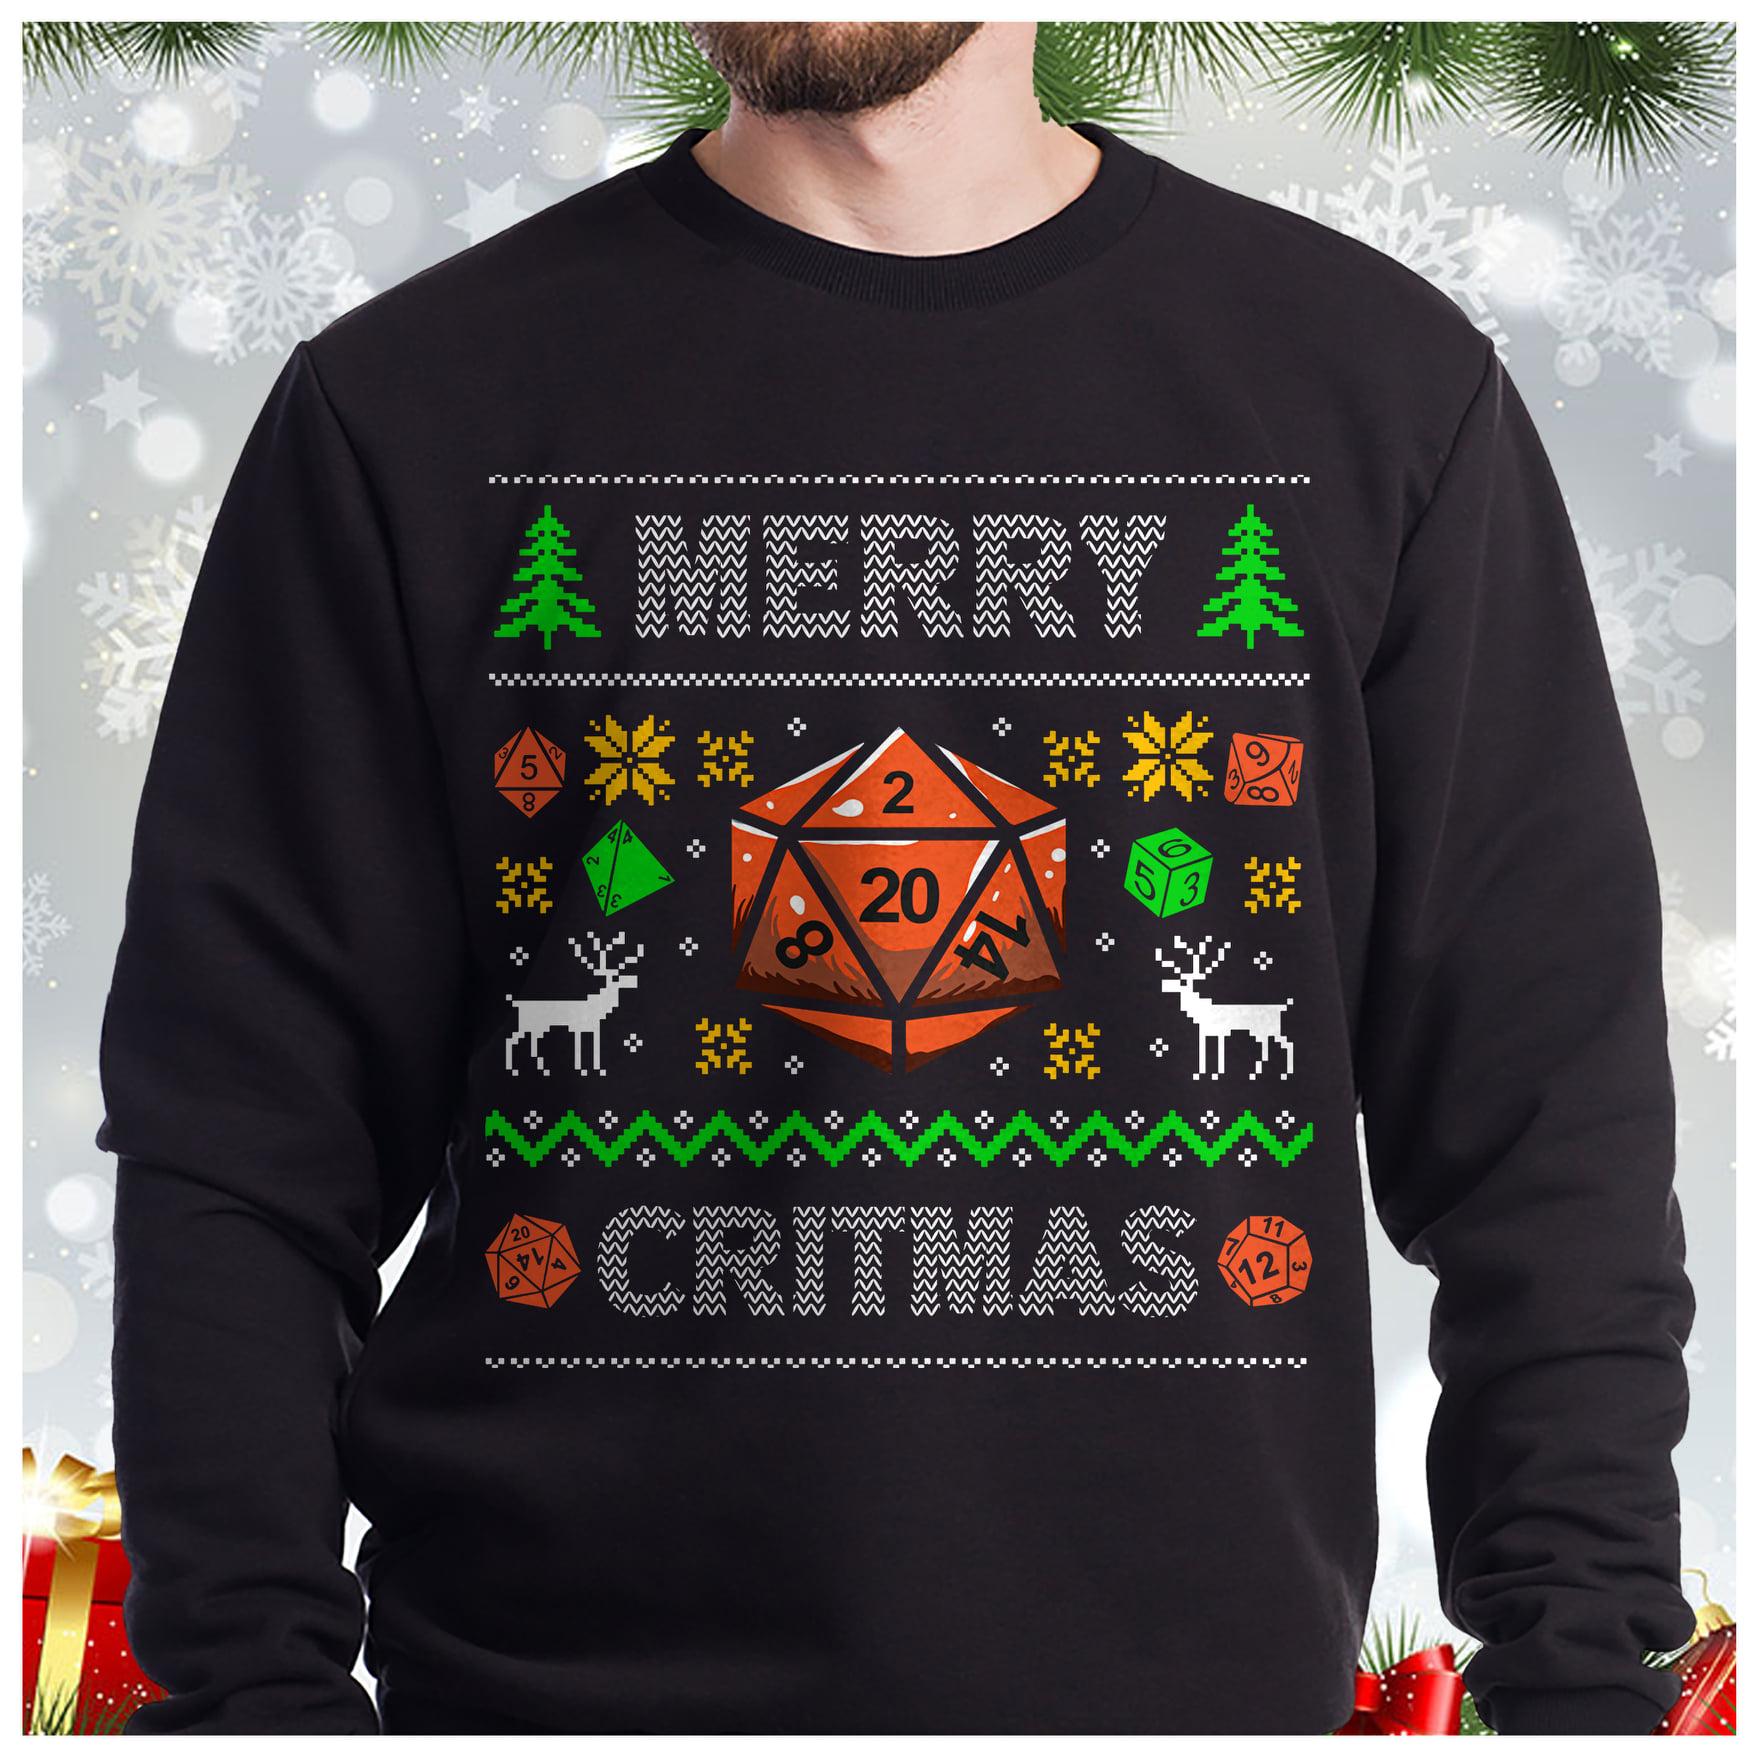 Merry Critmas - Dungeons and Dragons, Critmas day ugly sweater